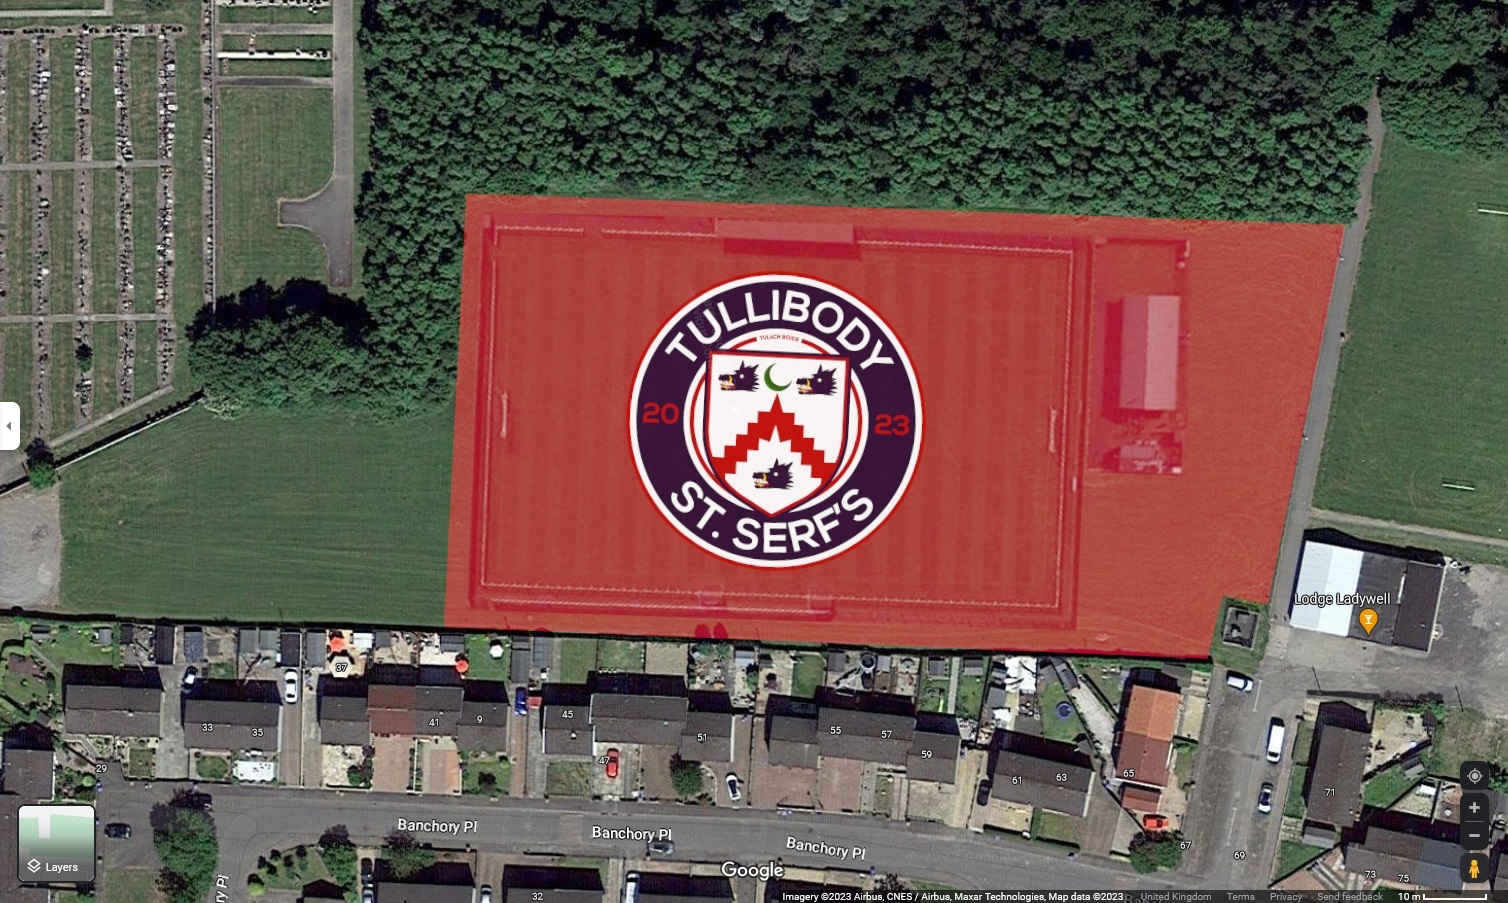 VISION: Tullubody St Serfs FC has submitted an asset transfer bid to secure long-term lease of Banchory Park, commonly known as The Coosie